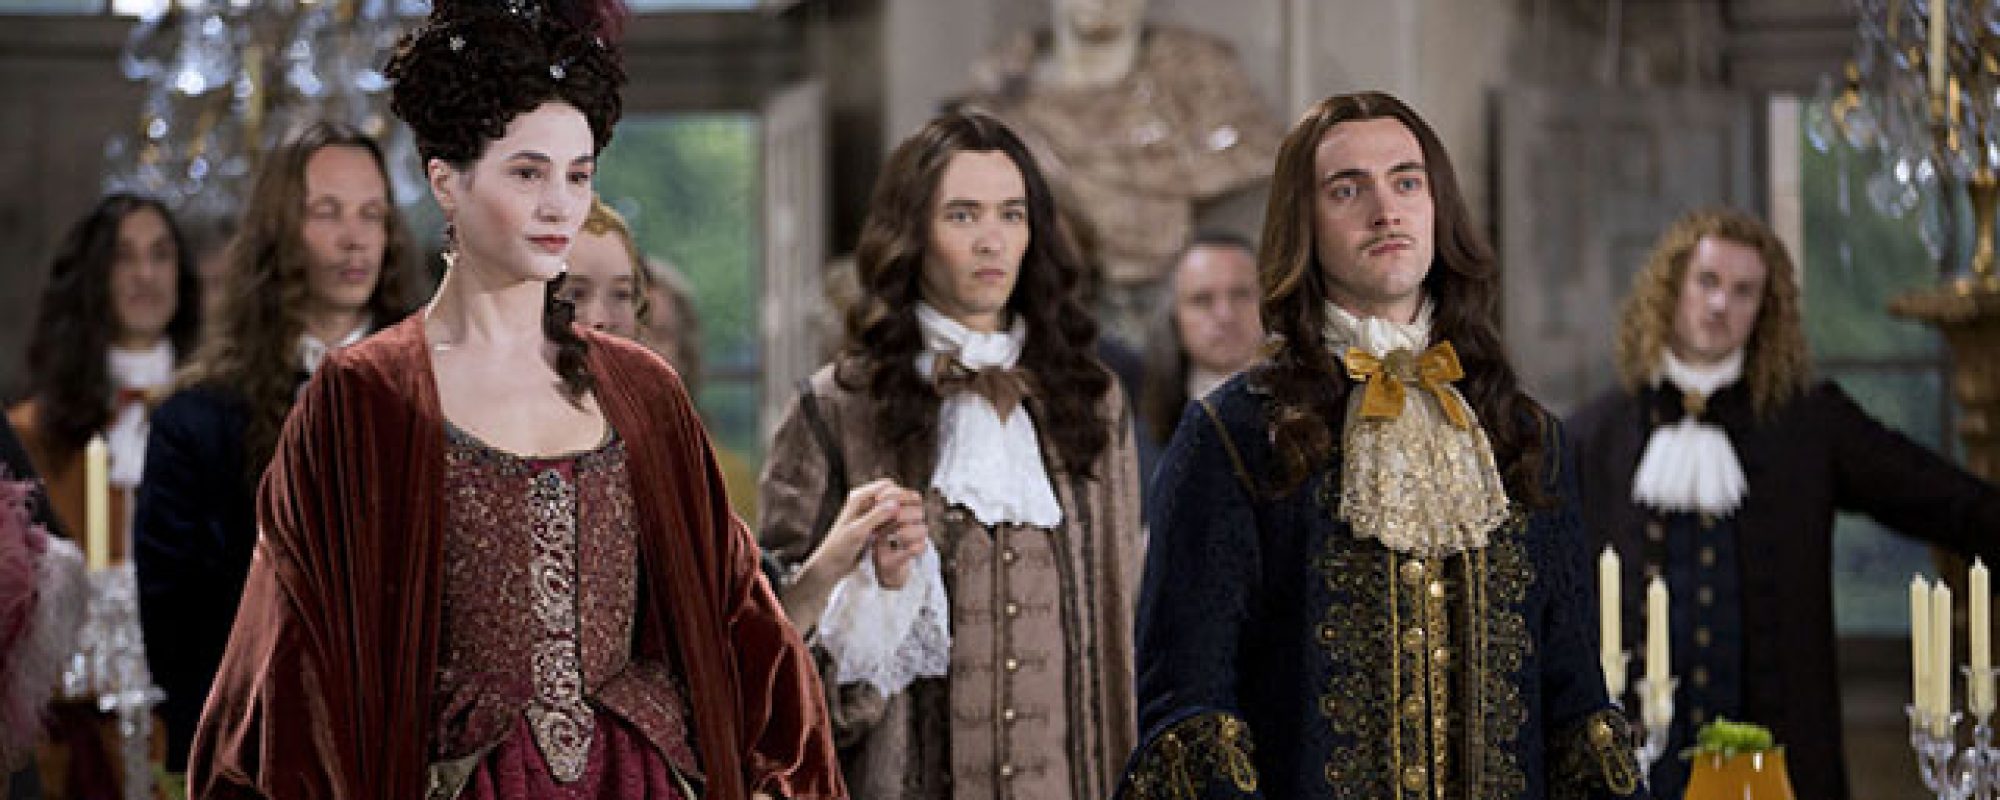 OVATION ACQUIRES U.S. PREMIERE RIGHTS TO SEASON THREE OF VERSAILLES, THE CRITICALLY ACCLAIMED INTERNATIONAL HIT DRAMA SERIES